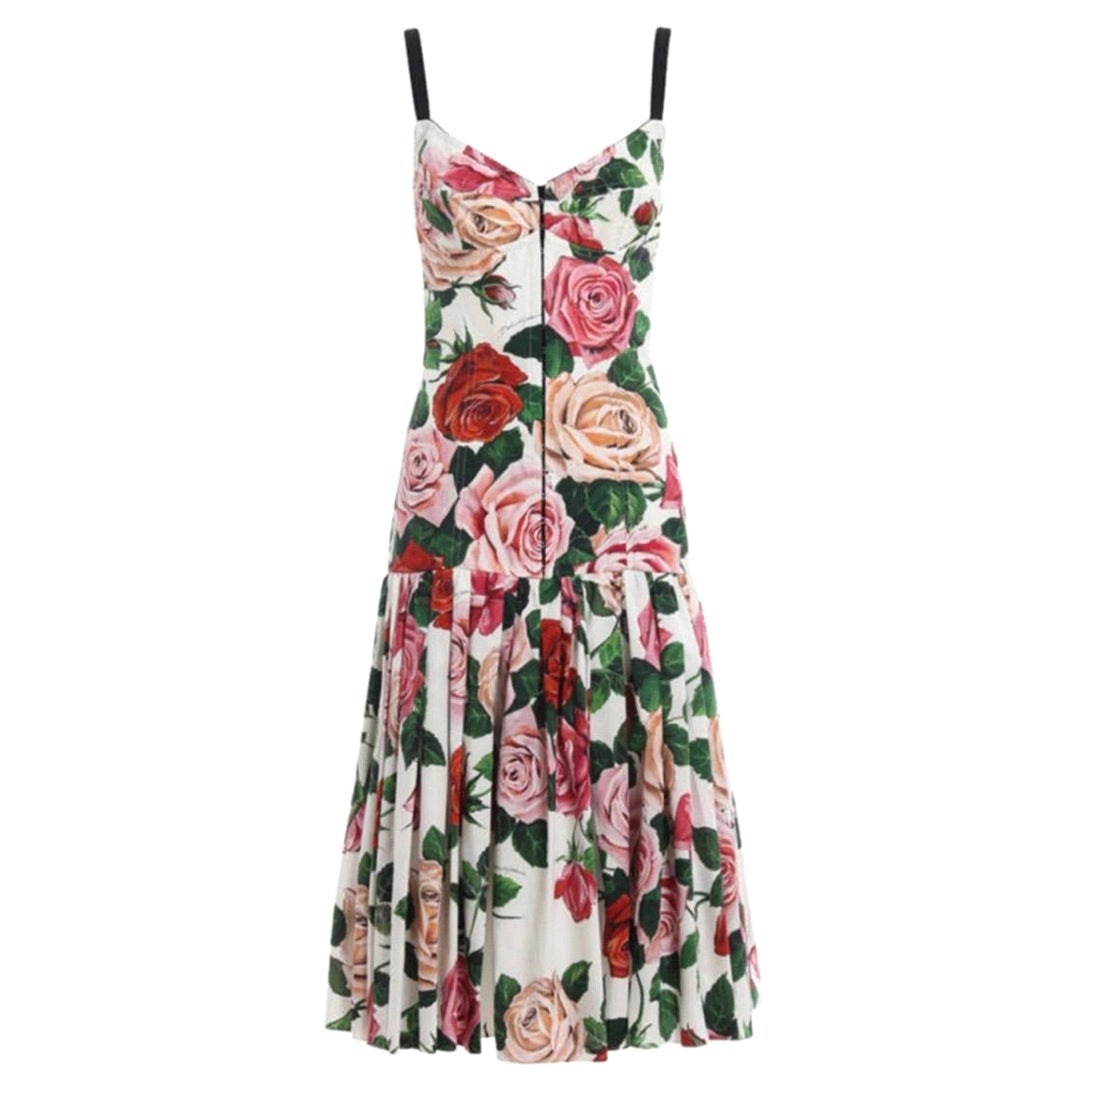 Dolce & Gabbana dress made from
flower printed stretch cotton poplin For Sale